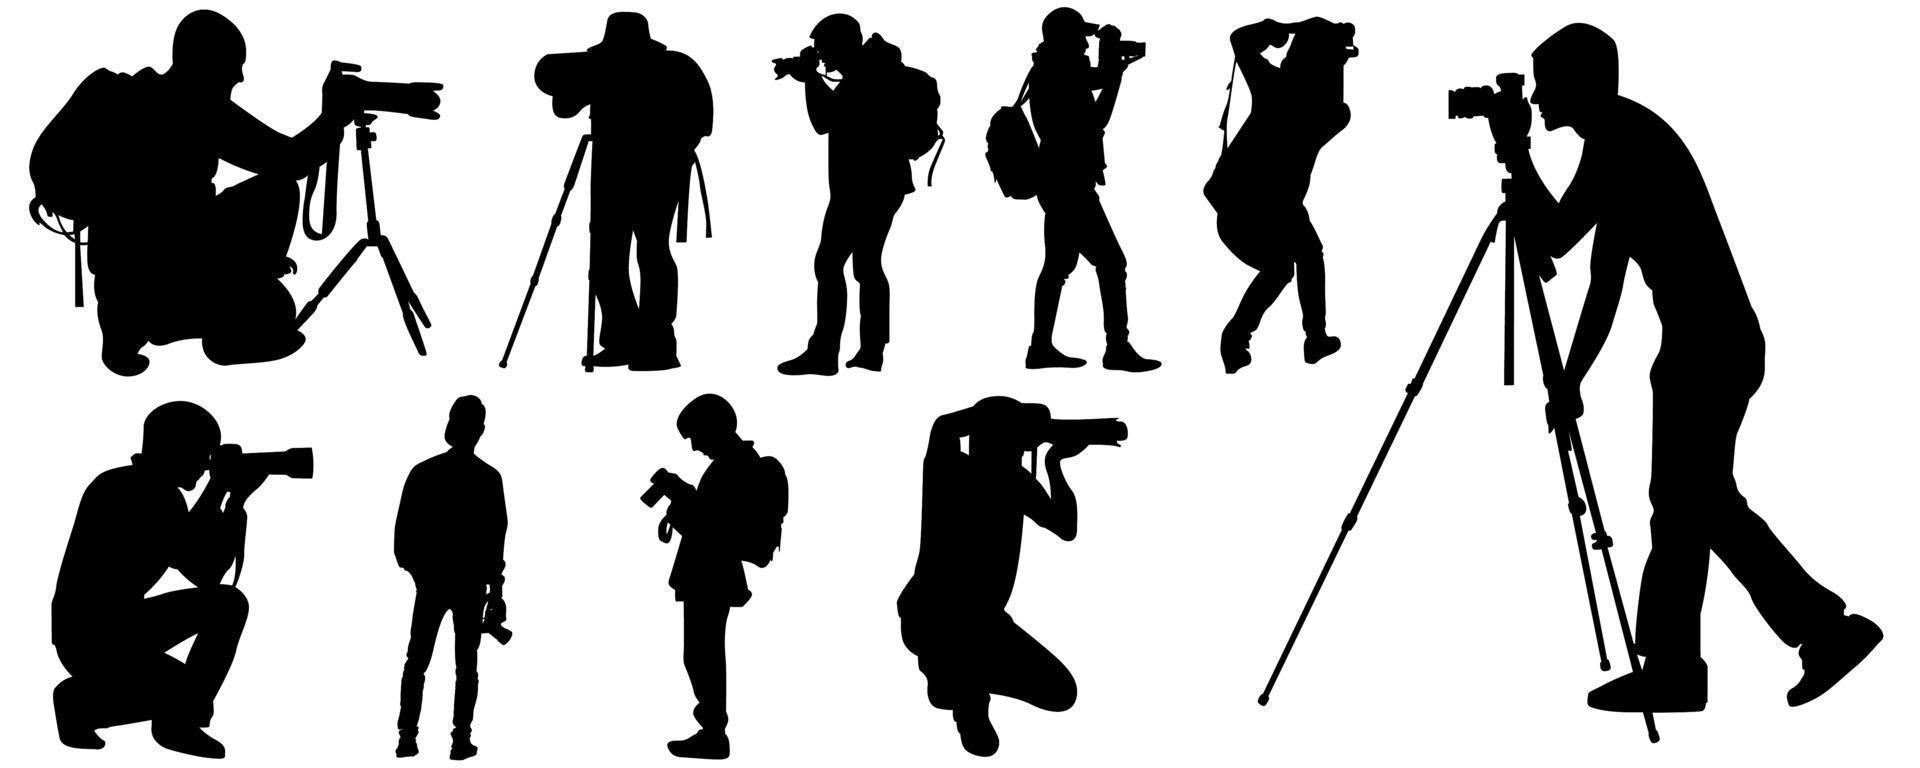 photographer silhouette vector collection. paparazzi, photography, vector, studio, camera, people, illustration, white